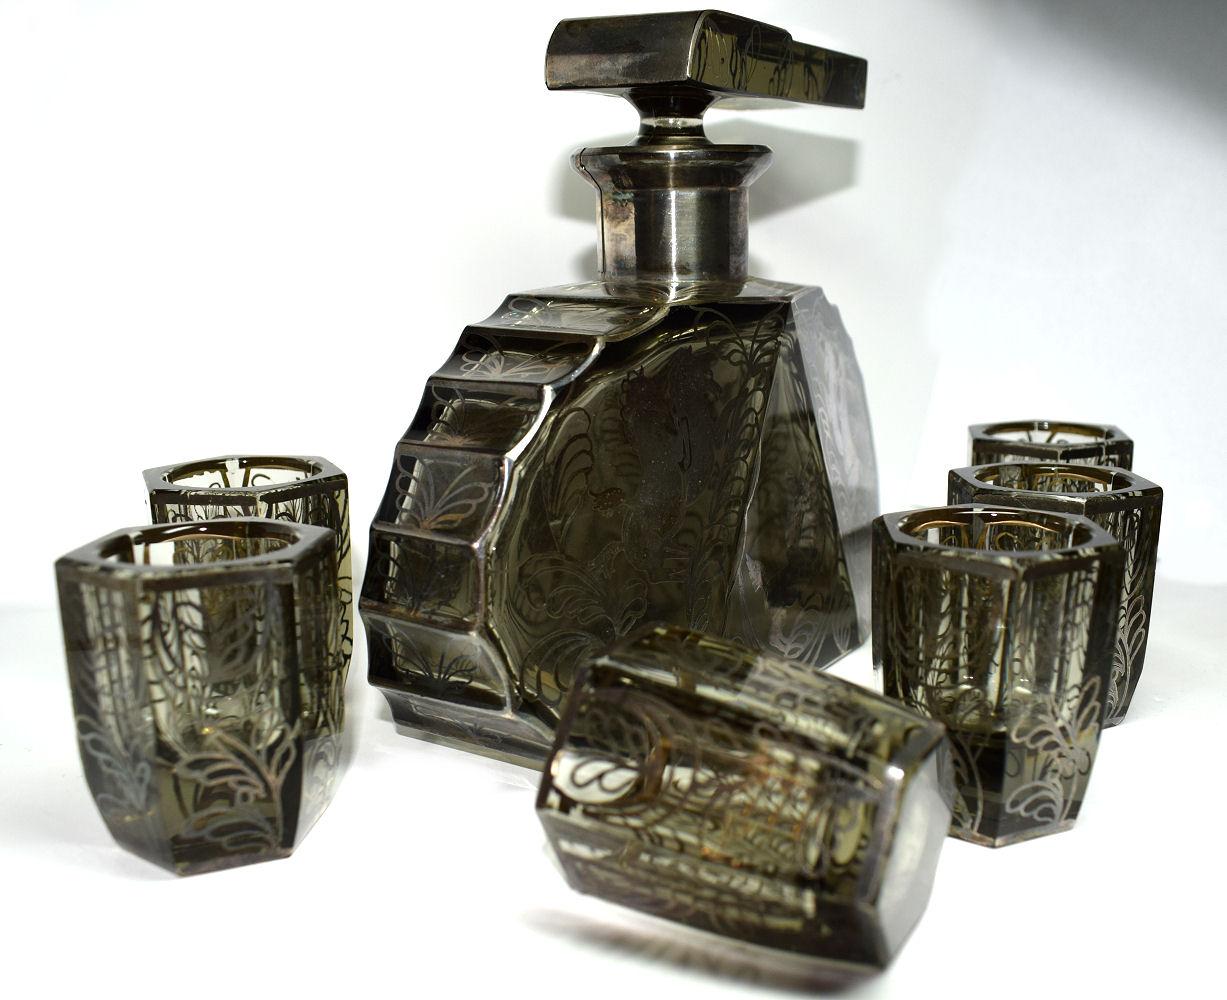 Very unusual and slightly wacky shaped 1930s Art Deco decanter set originating from Czechoslovakia. Comprises decanter, stopper and six glasses. Clear heavy cut-glass with floral silver overlay decoration with horses. The decanter is deceptively